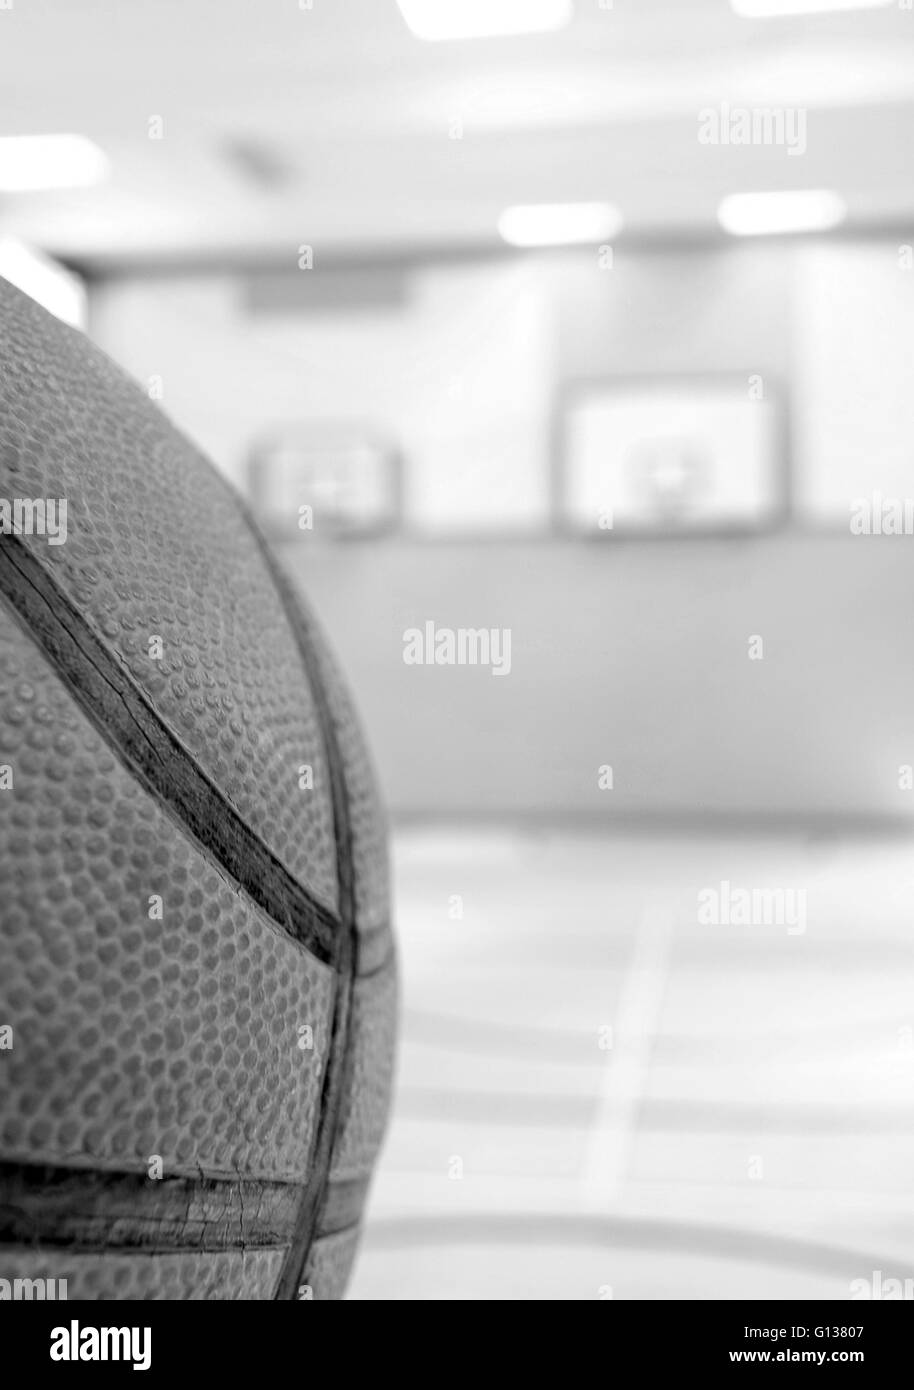 Basketball concept image, ball and baskets in a school gymnasium 8th May 2016 Stock Photo